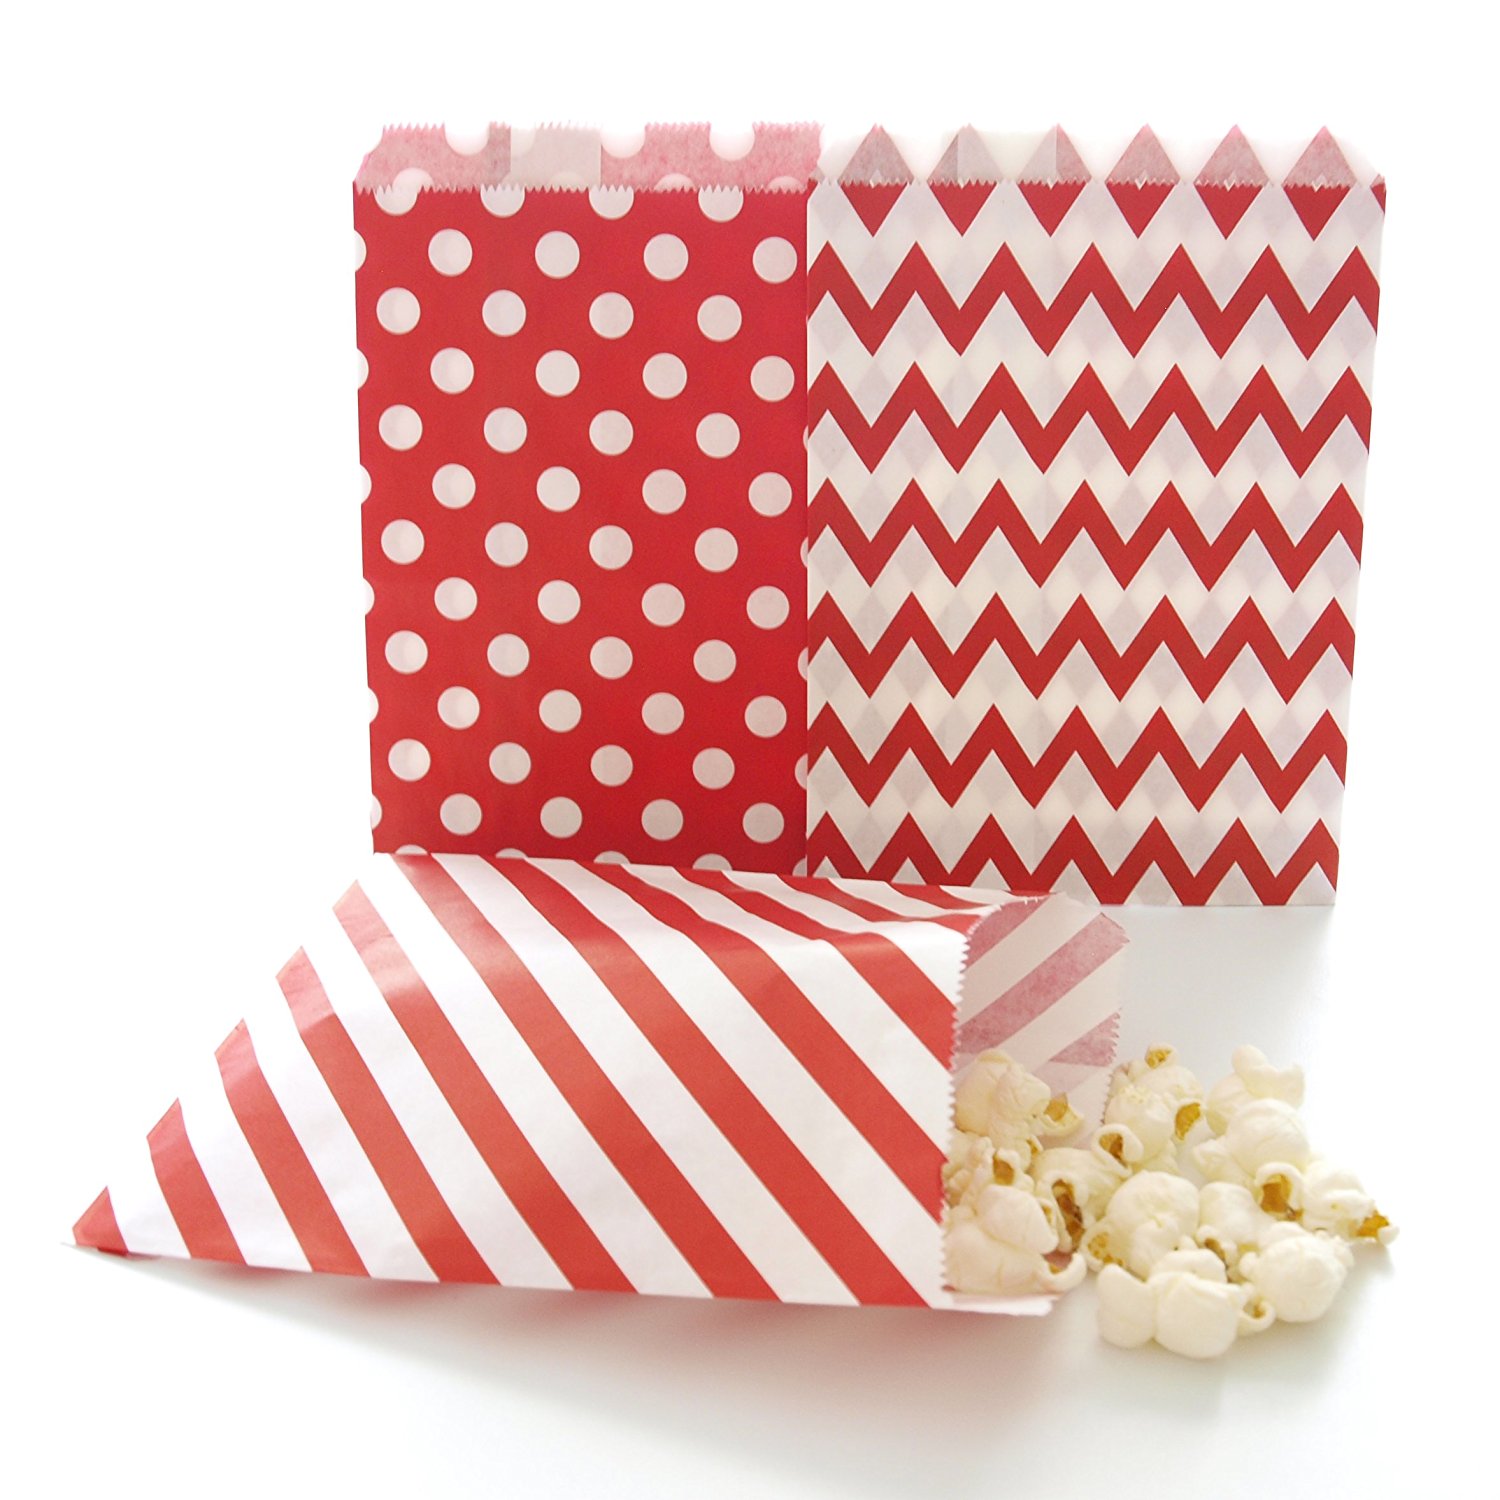 Amazon.com: Red Party Bags, Paper Christmas Candy Treat Bags ...